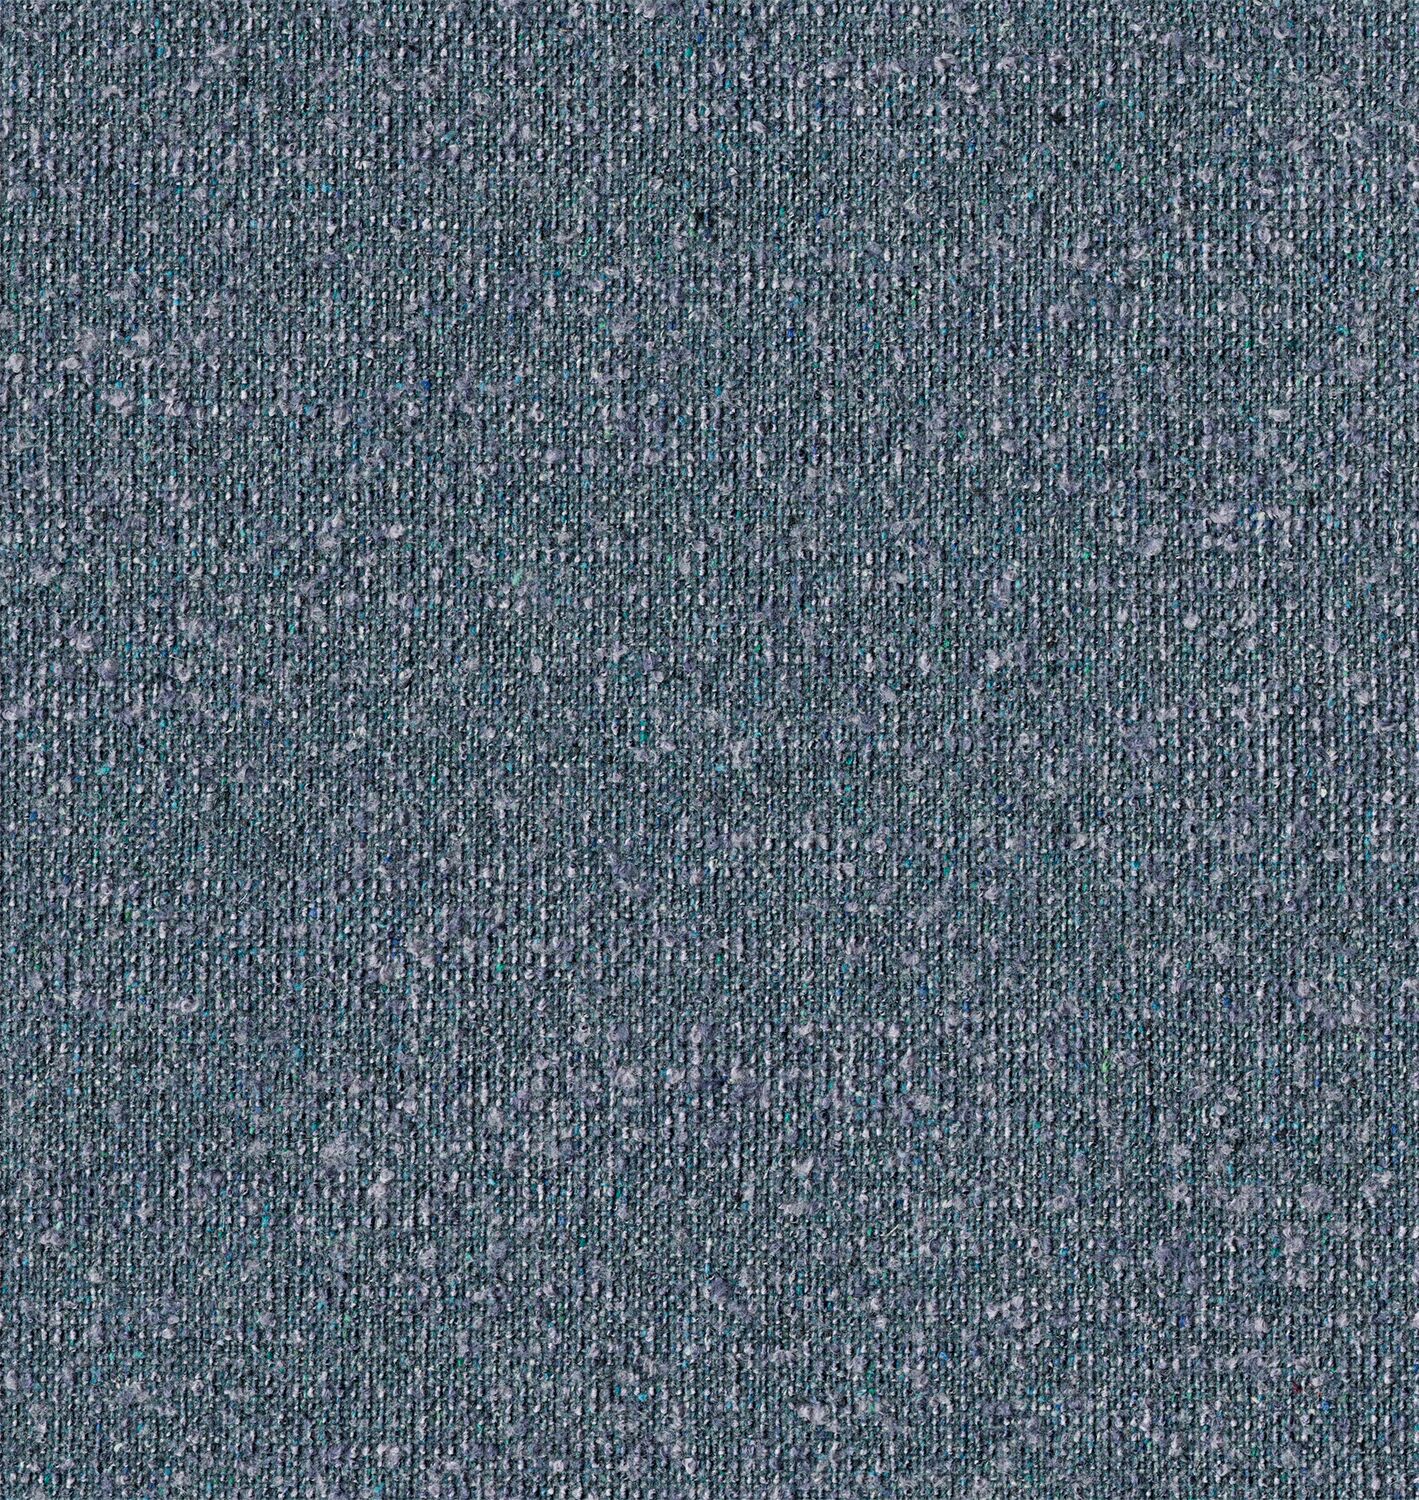 Everyday Boucle - Blue Phlox - 4111 - 15 Tileable Swatches